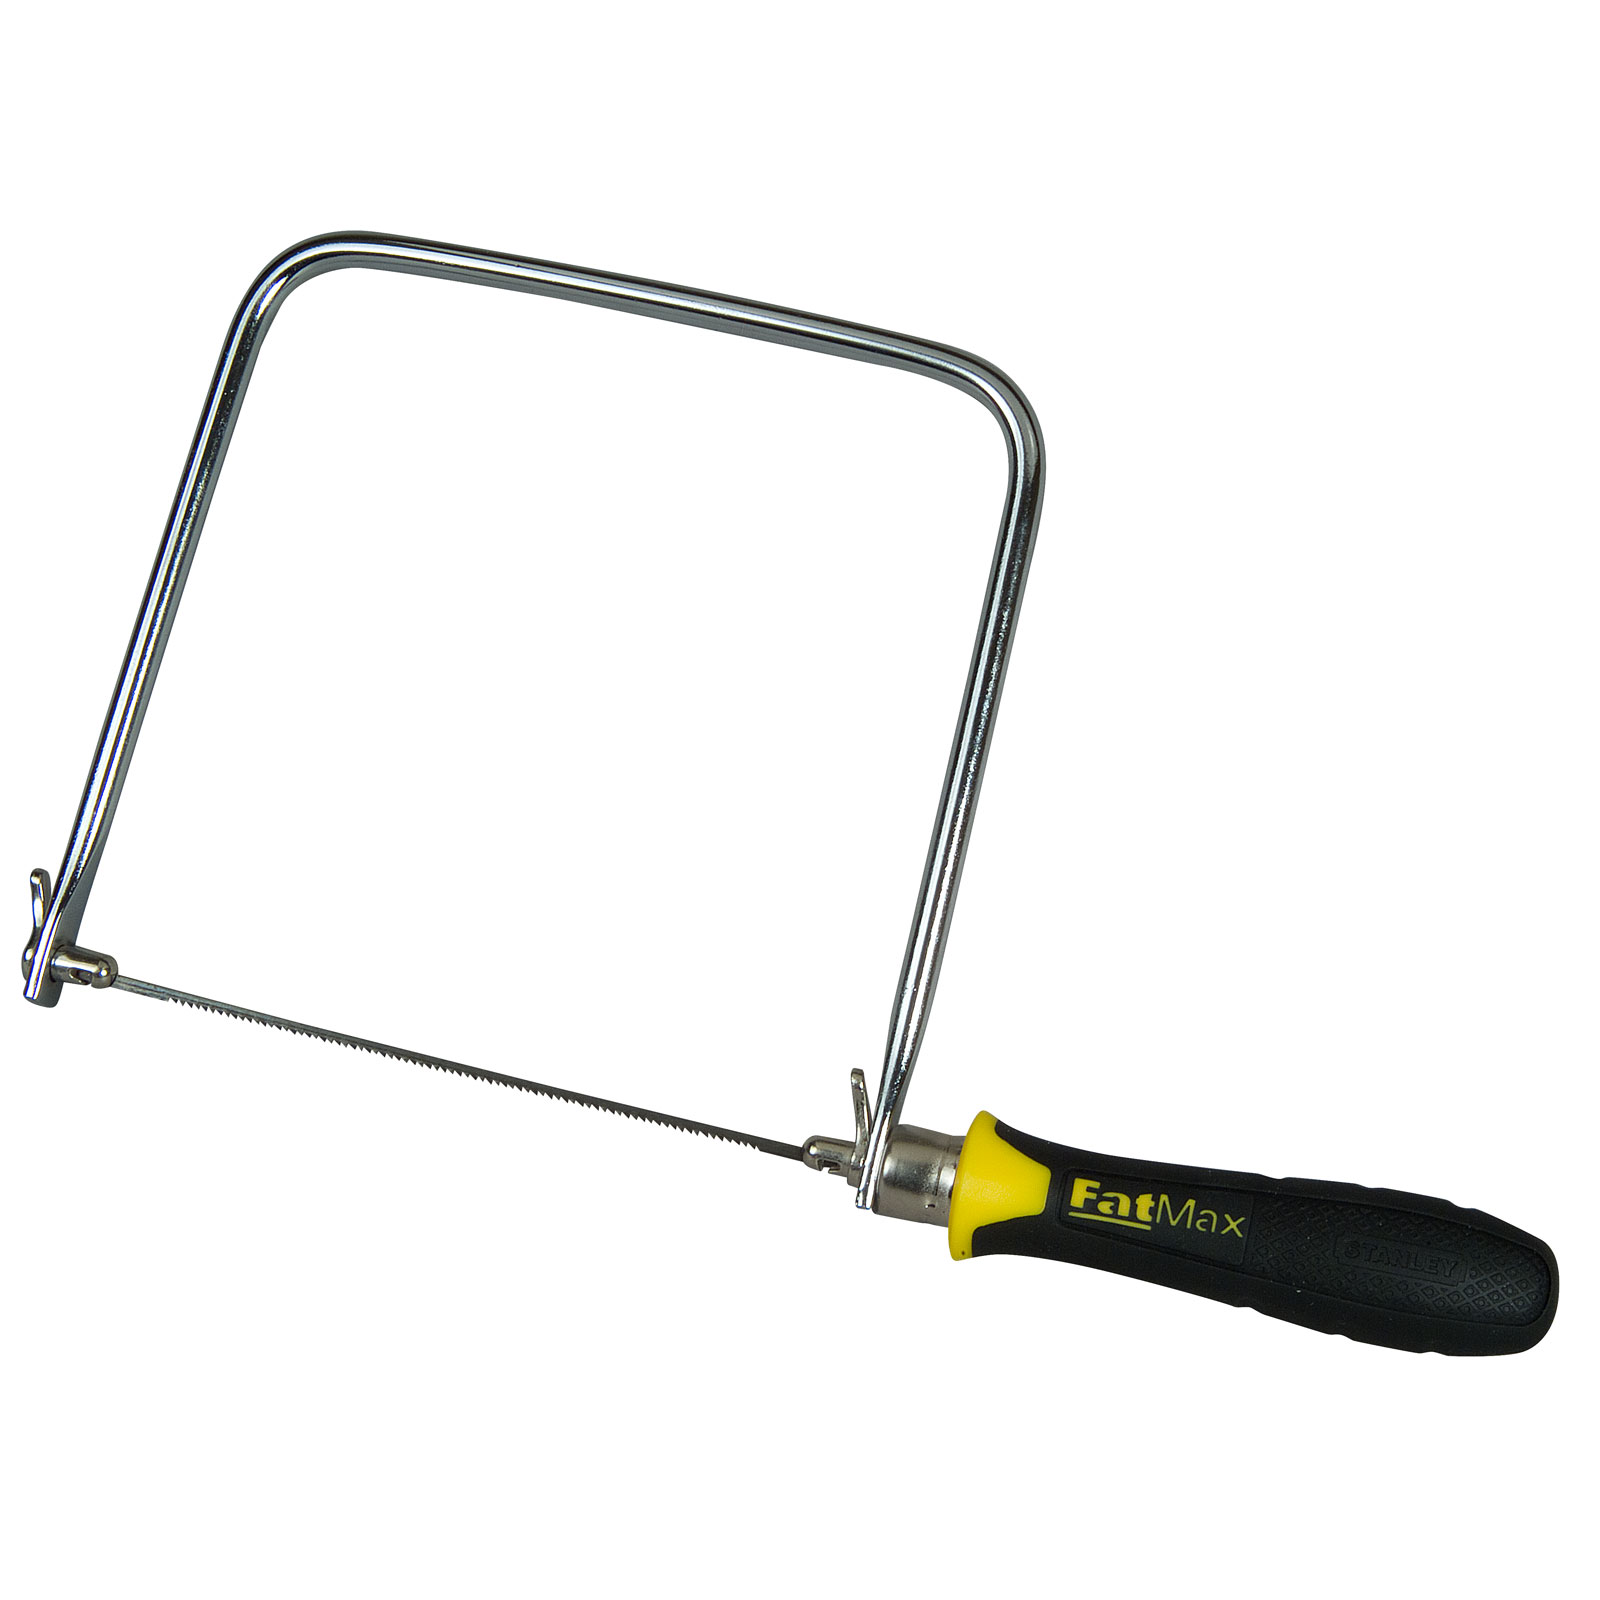 Stanley FATMAX 6 in. Coping Saw STHT15106 - The Home Depot